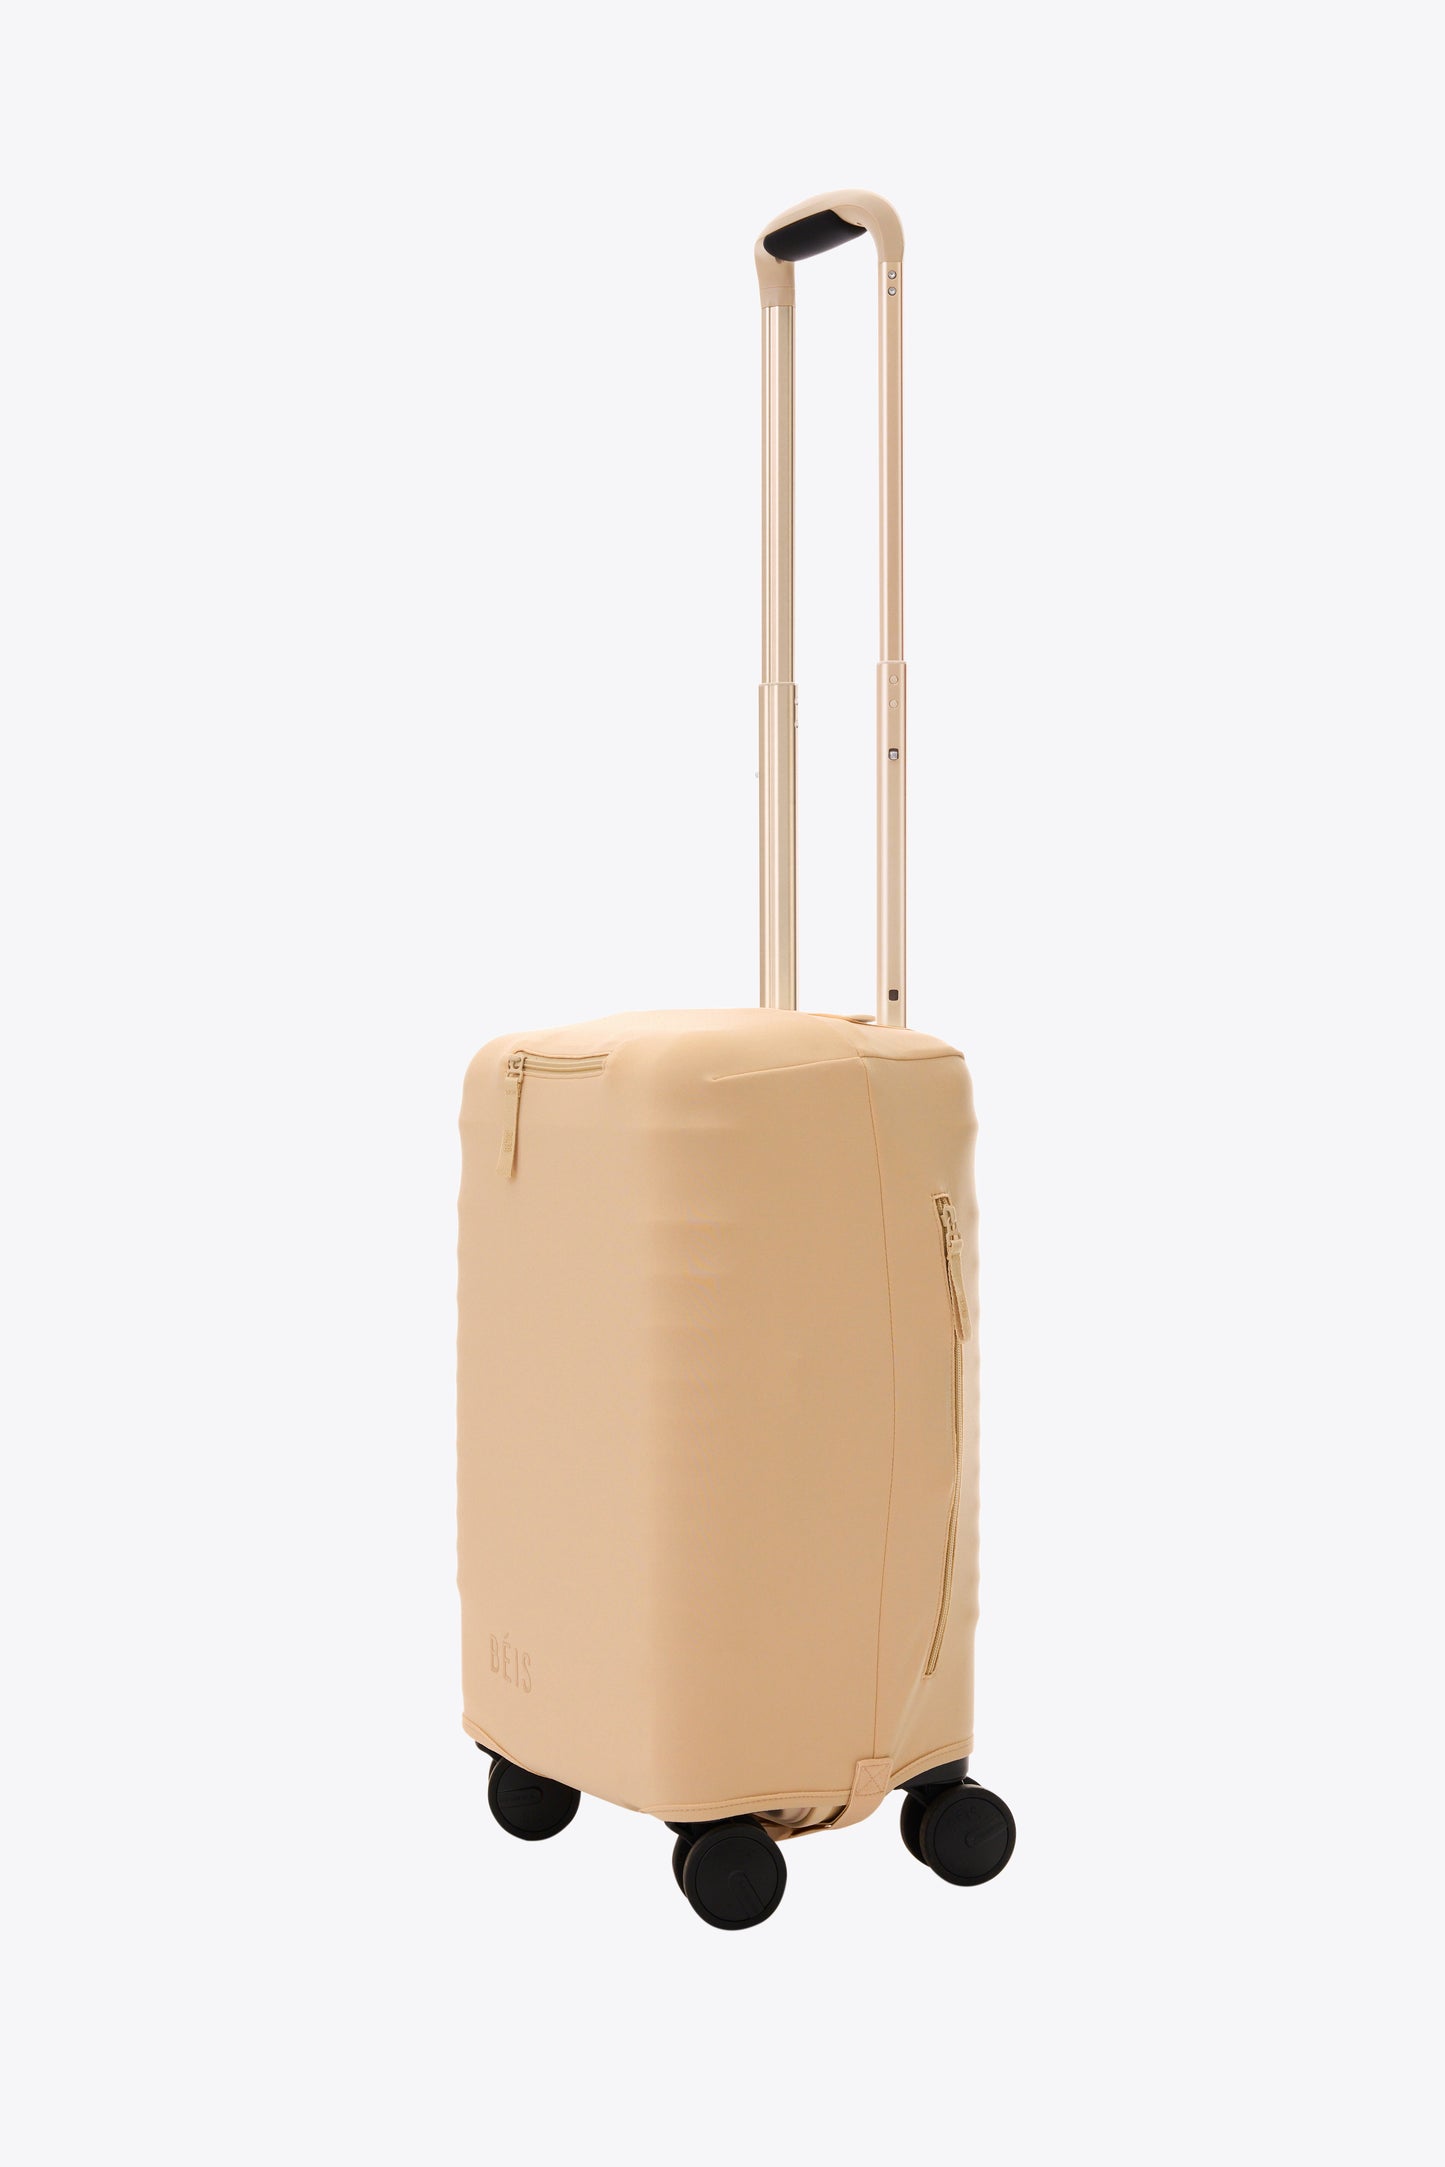 The Small Carry-On Luggage Cover in Beige